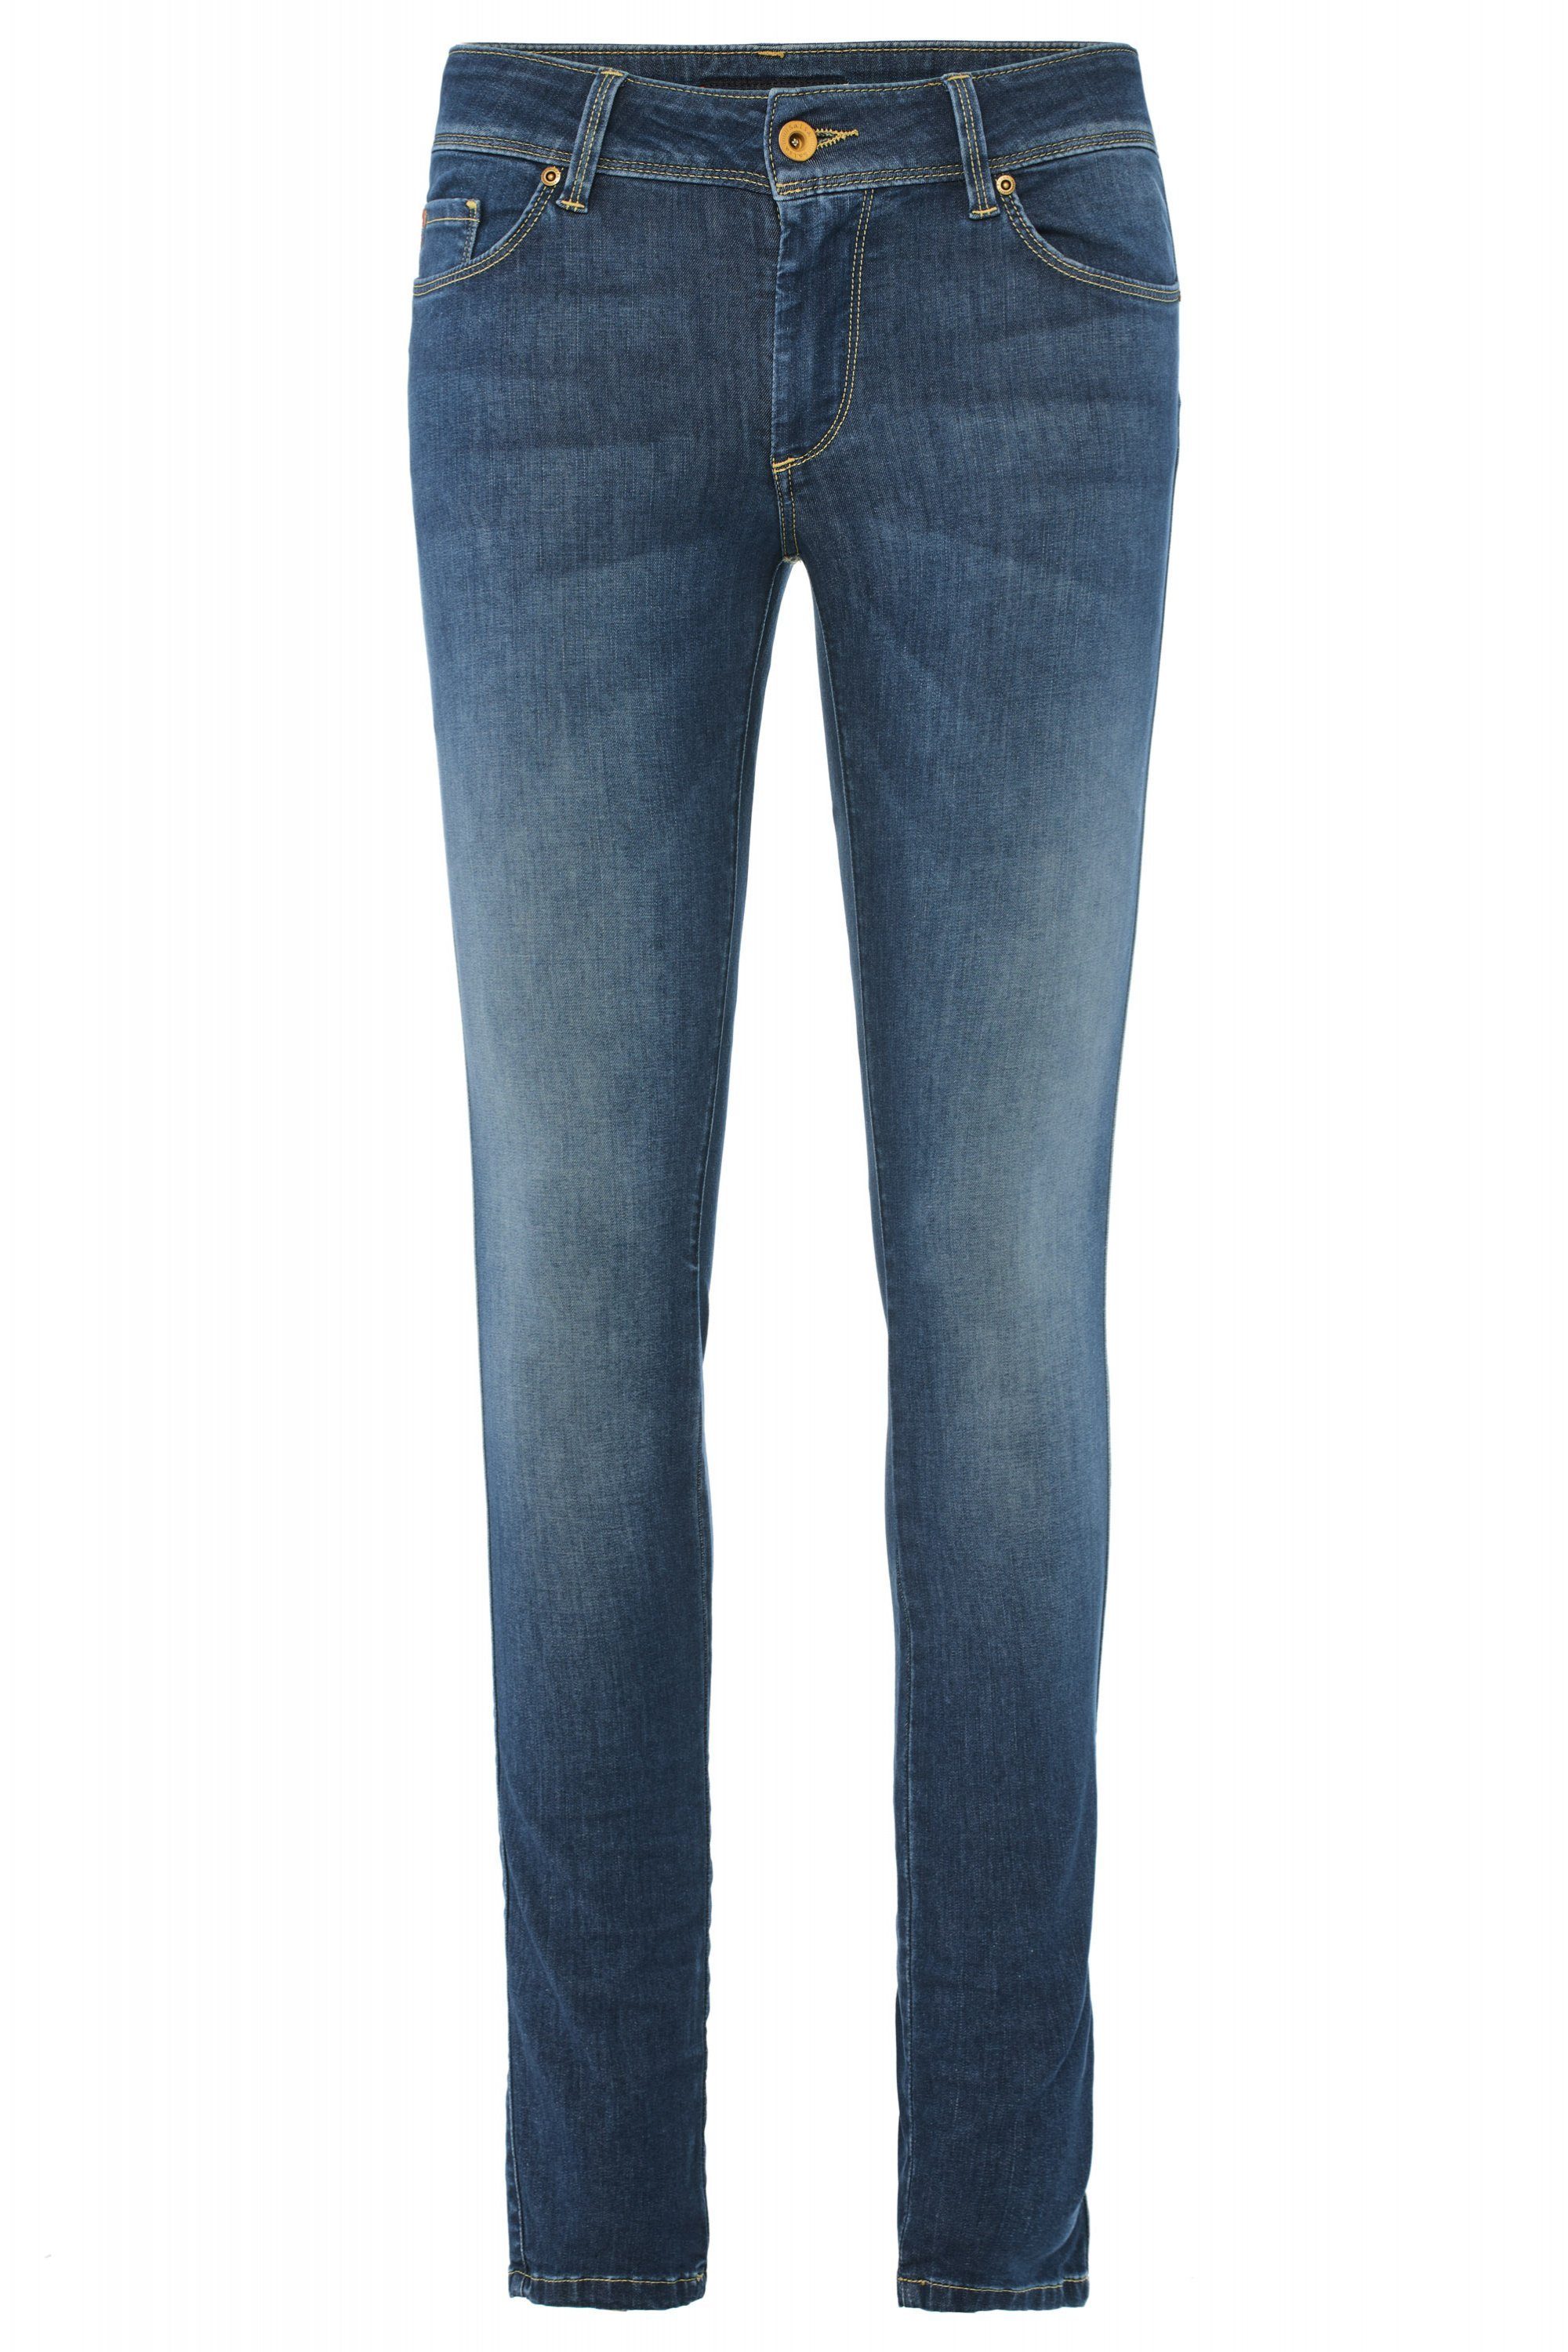 Salsa Stretch-Jeans SALSA JEANS WONDER PUSH UP SKINNY mid blue washed out 123540.8506 -